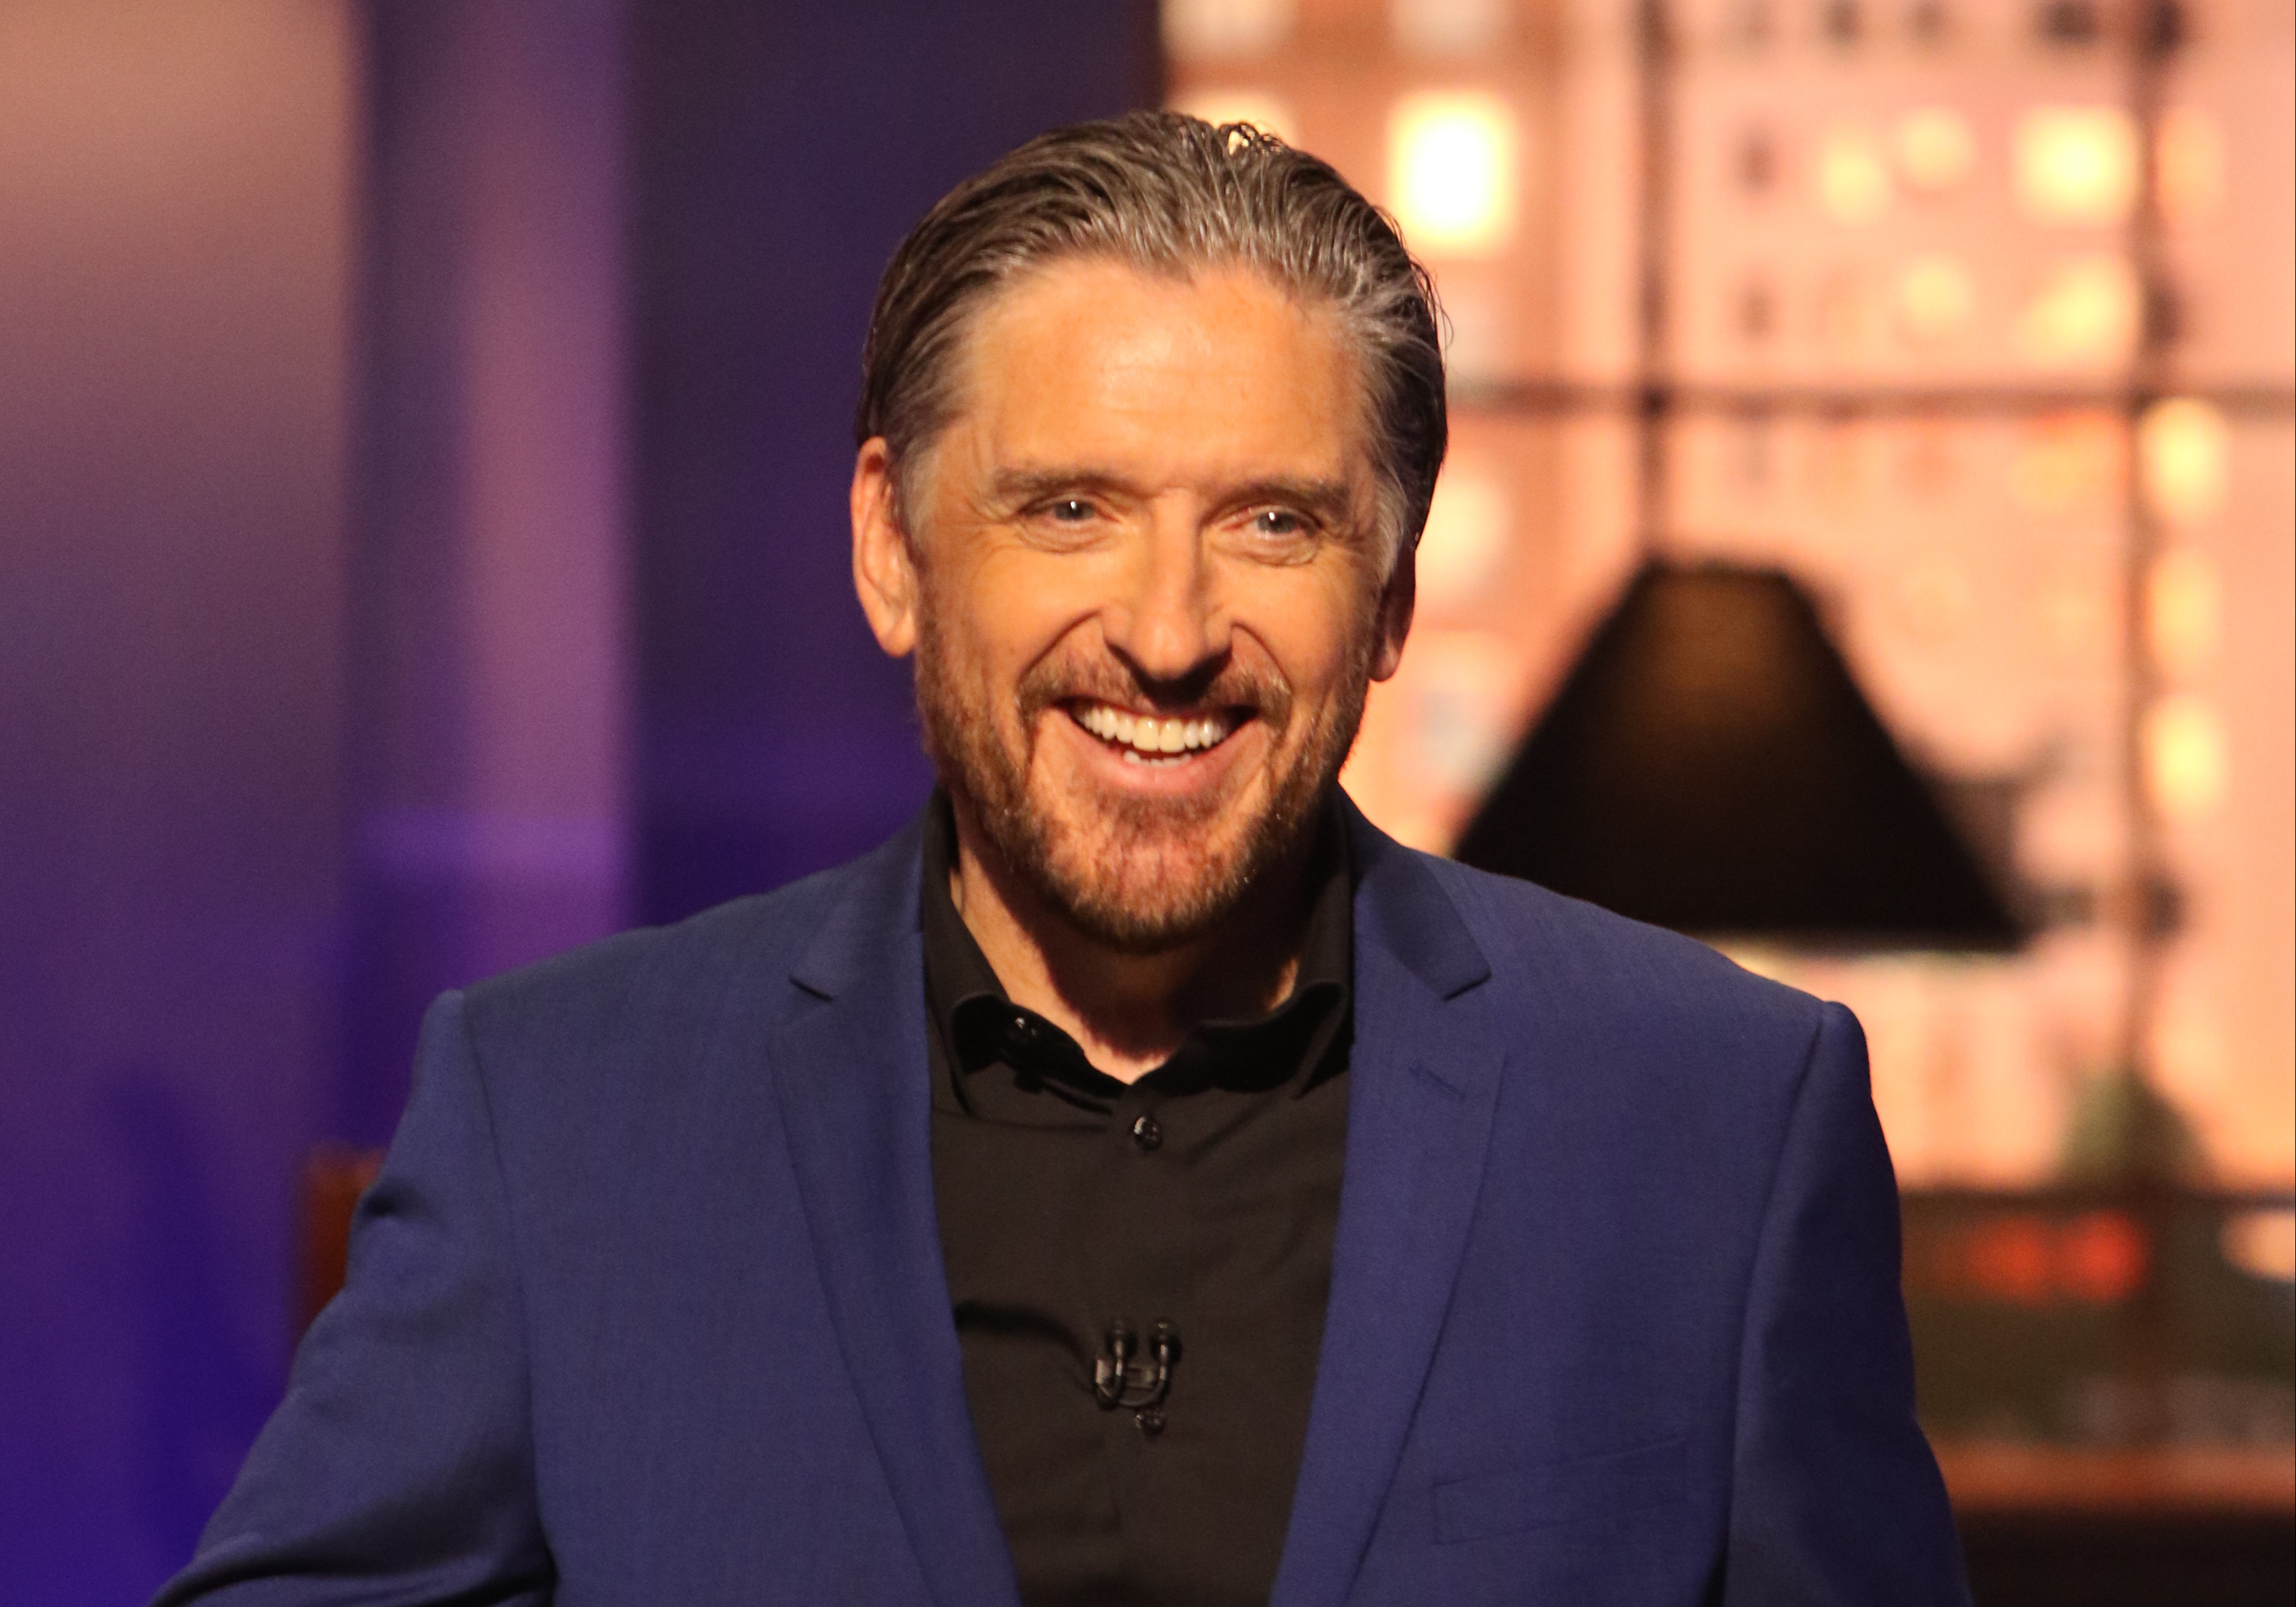 Craig Ferguson during a Season 2 episode of "The Red Nose Day Special" on May 26, 2016. | Source: Getty Images